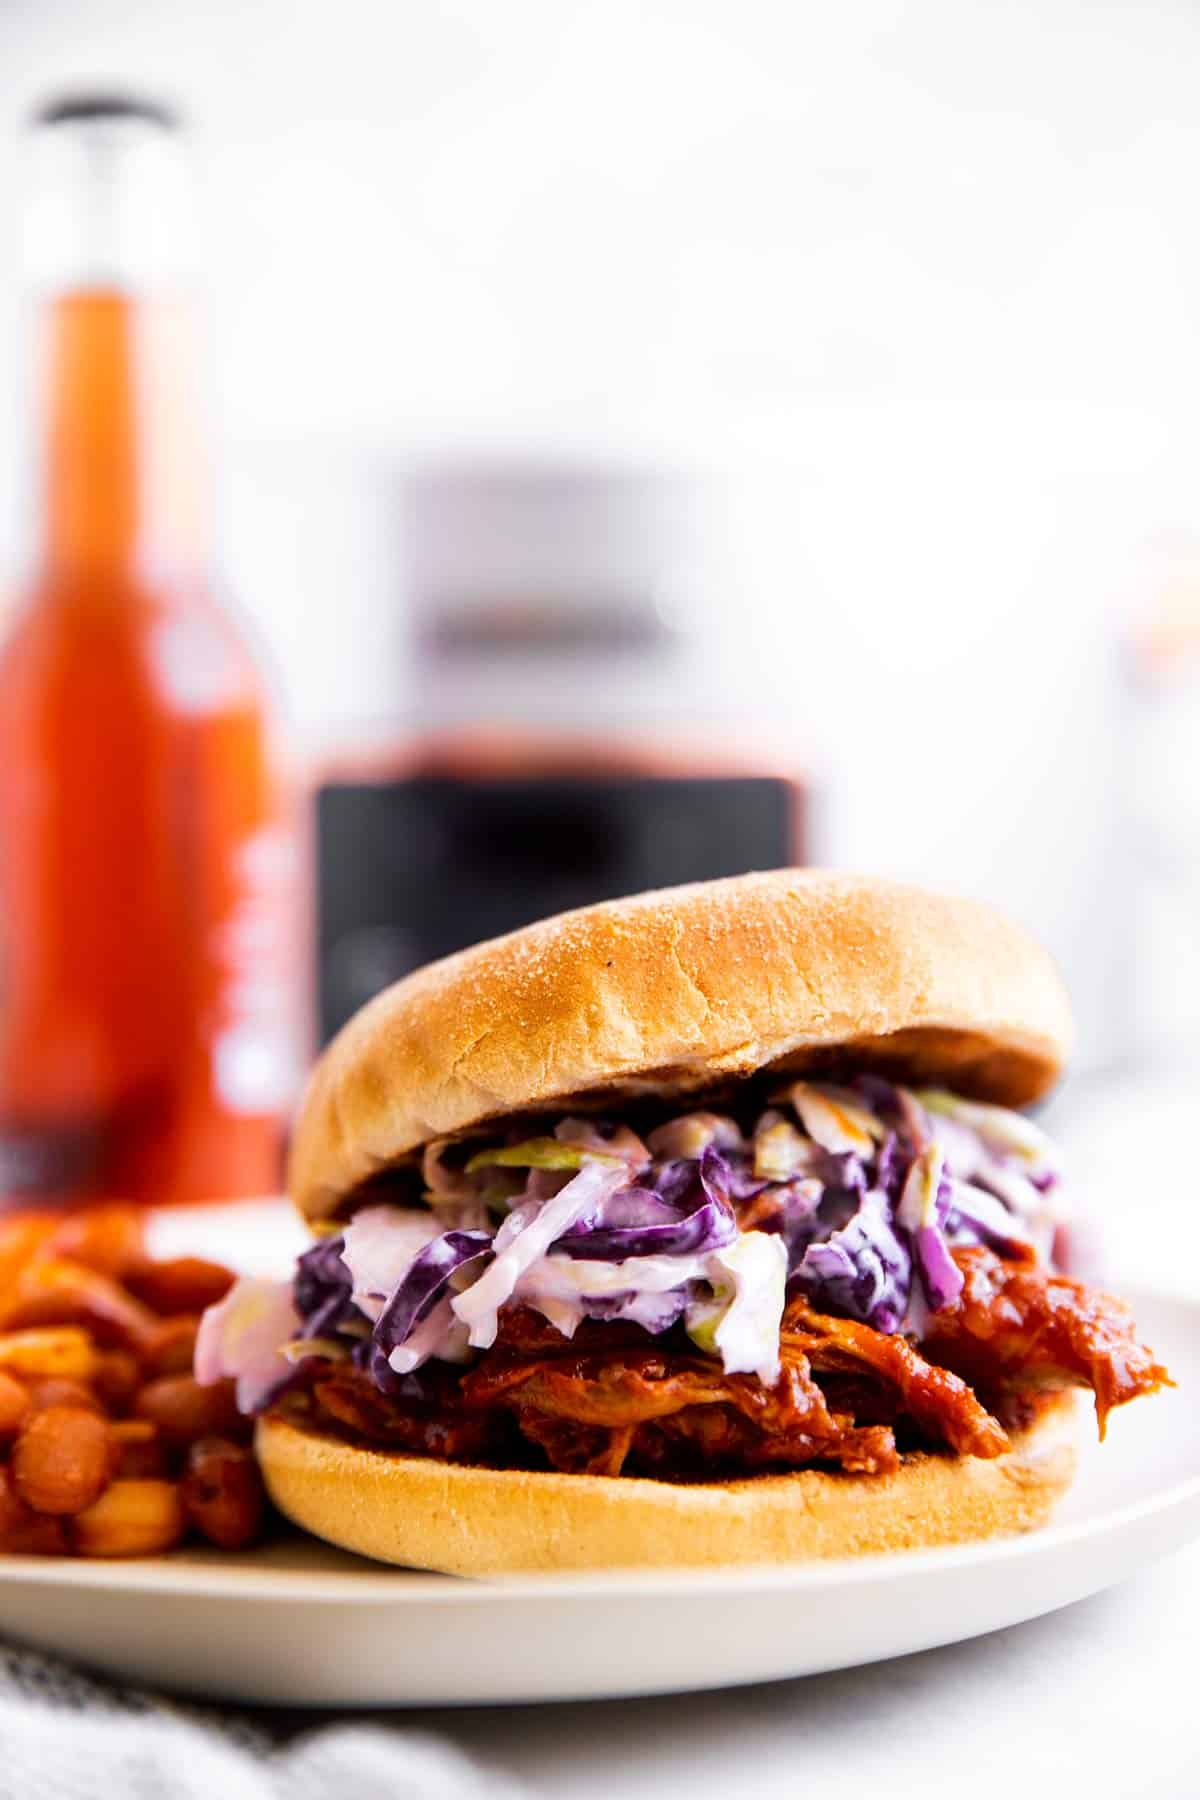 pulled pork sandwich with beer and crockpot in background